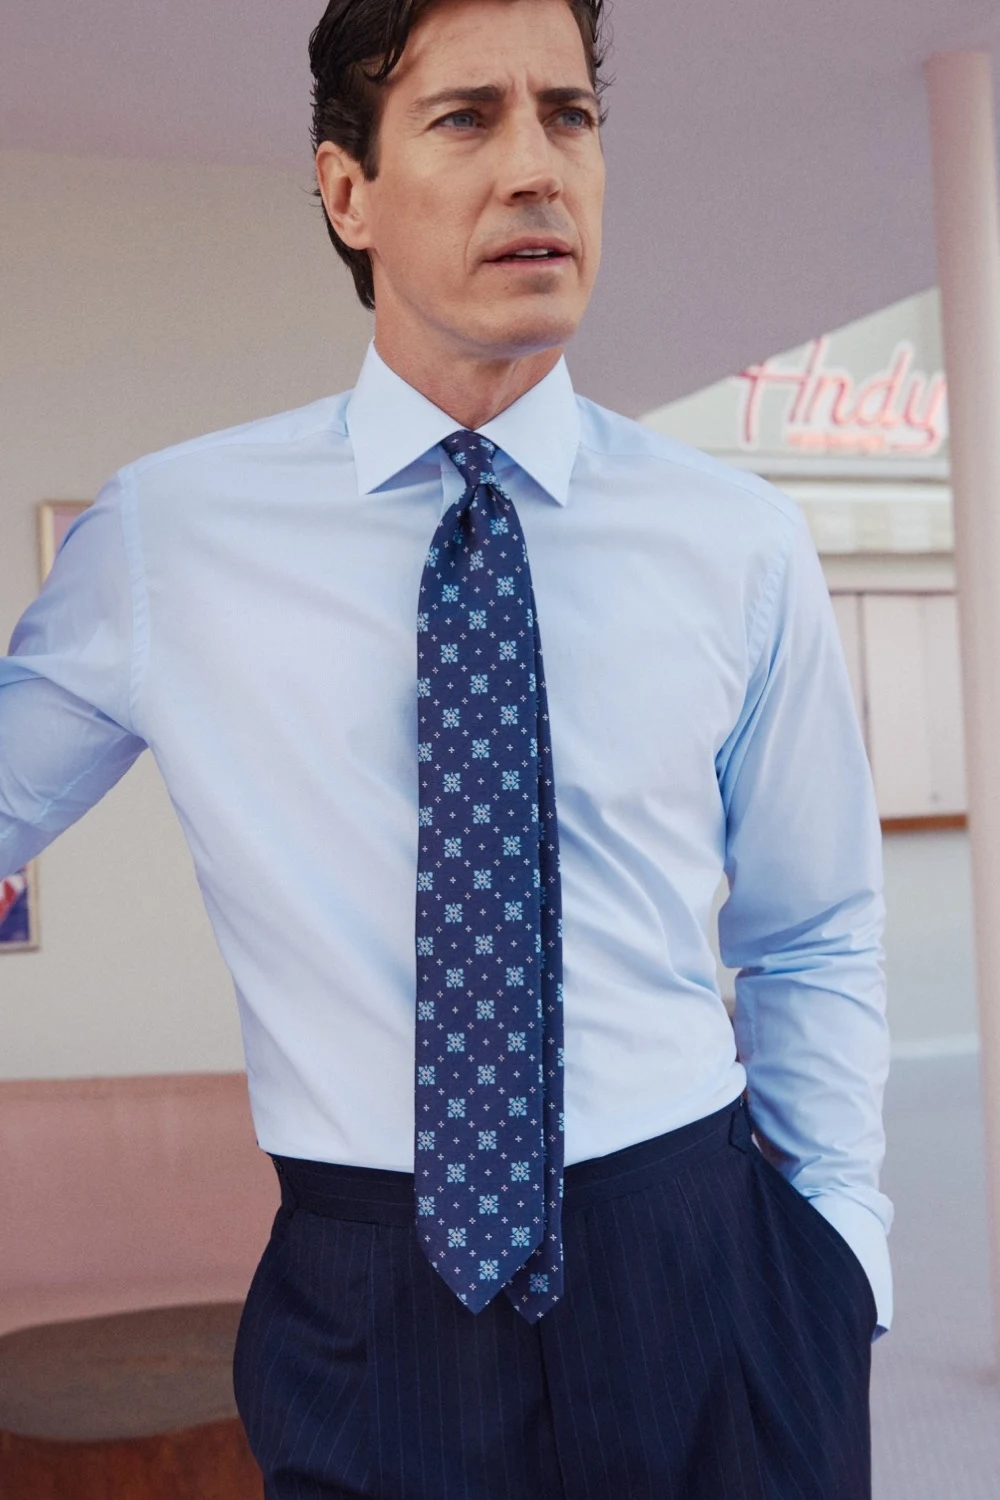 model in tie and shirt in blue shades